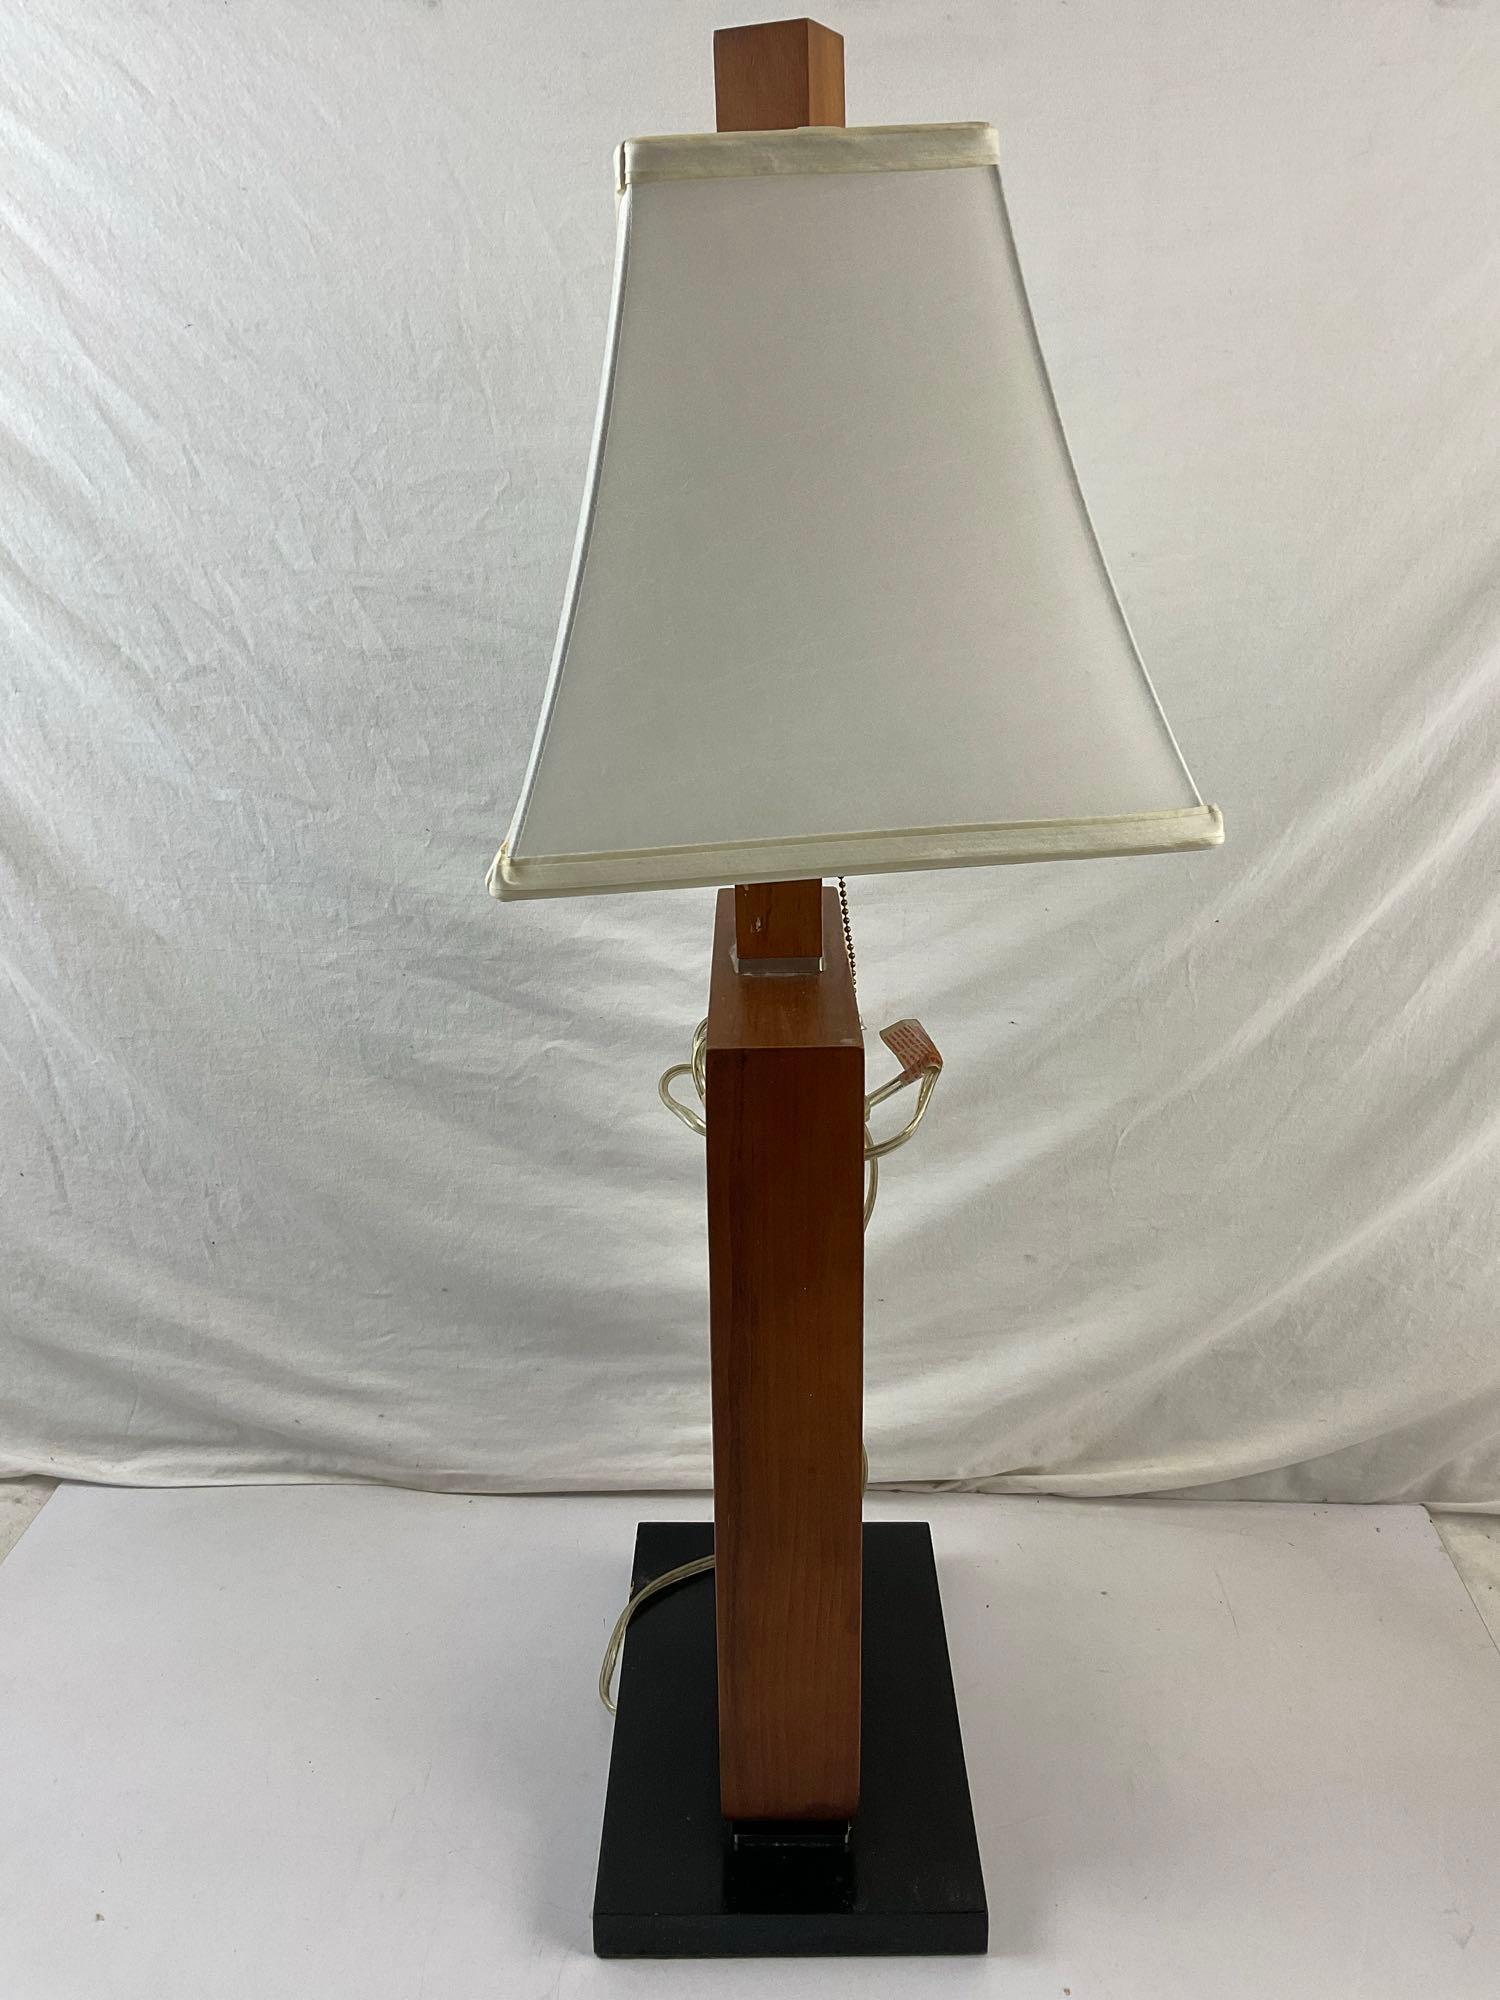 Modern Wooden Geometric Table Lamp w/ Cream Cloth Shade. Tested, Working. See pics.